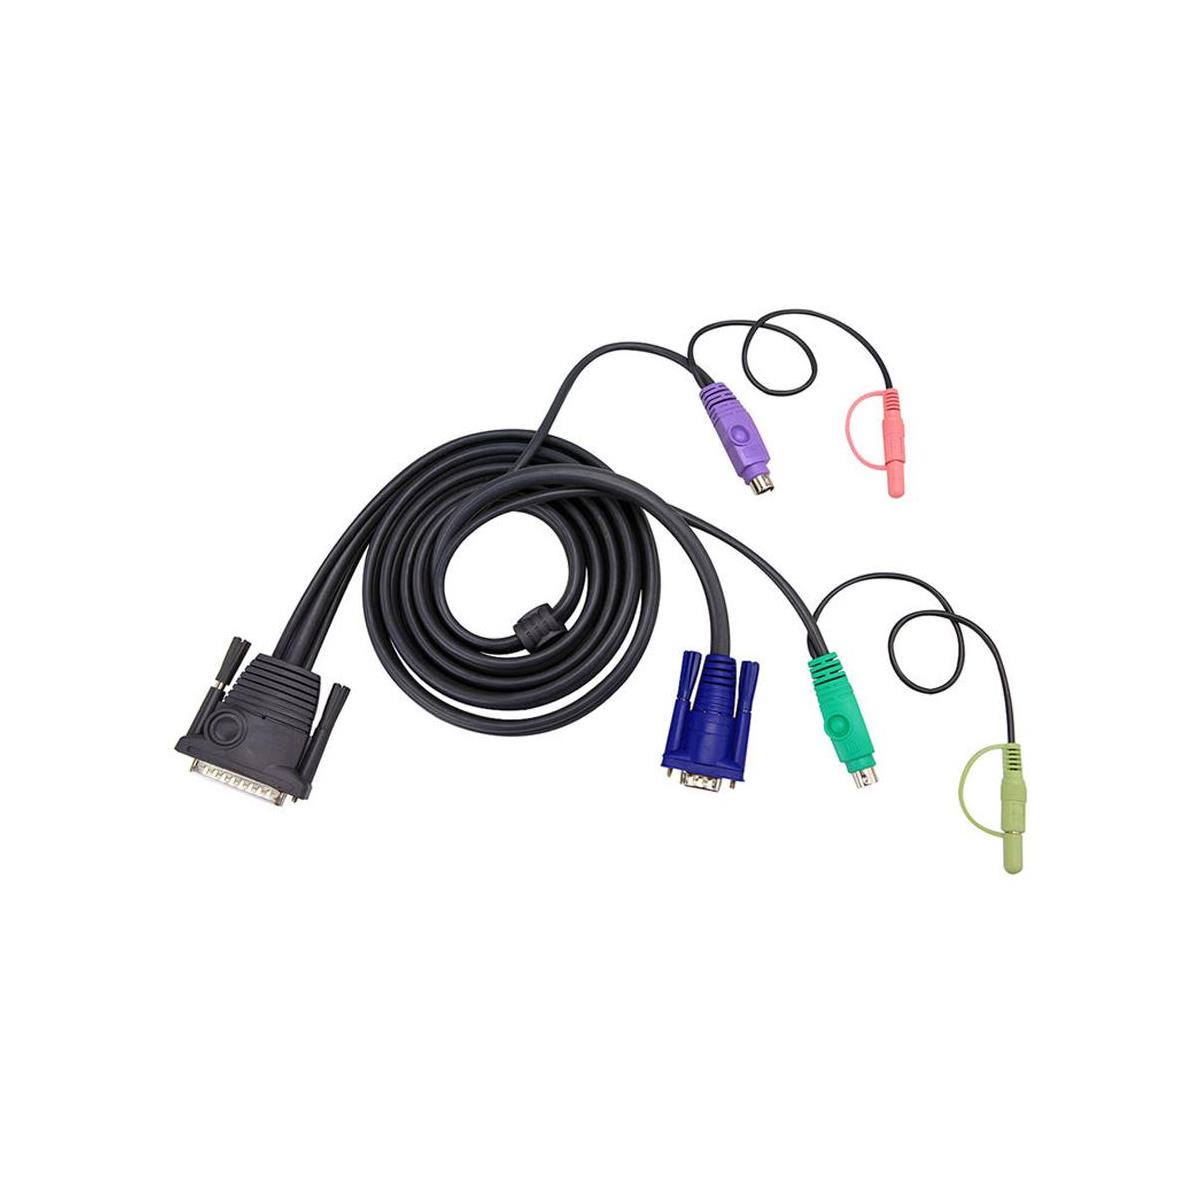 

Aten 2L1701P 6' DB-25M to HDB and PS/2 Male KVM Cable with Audio